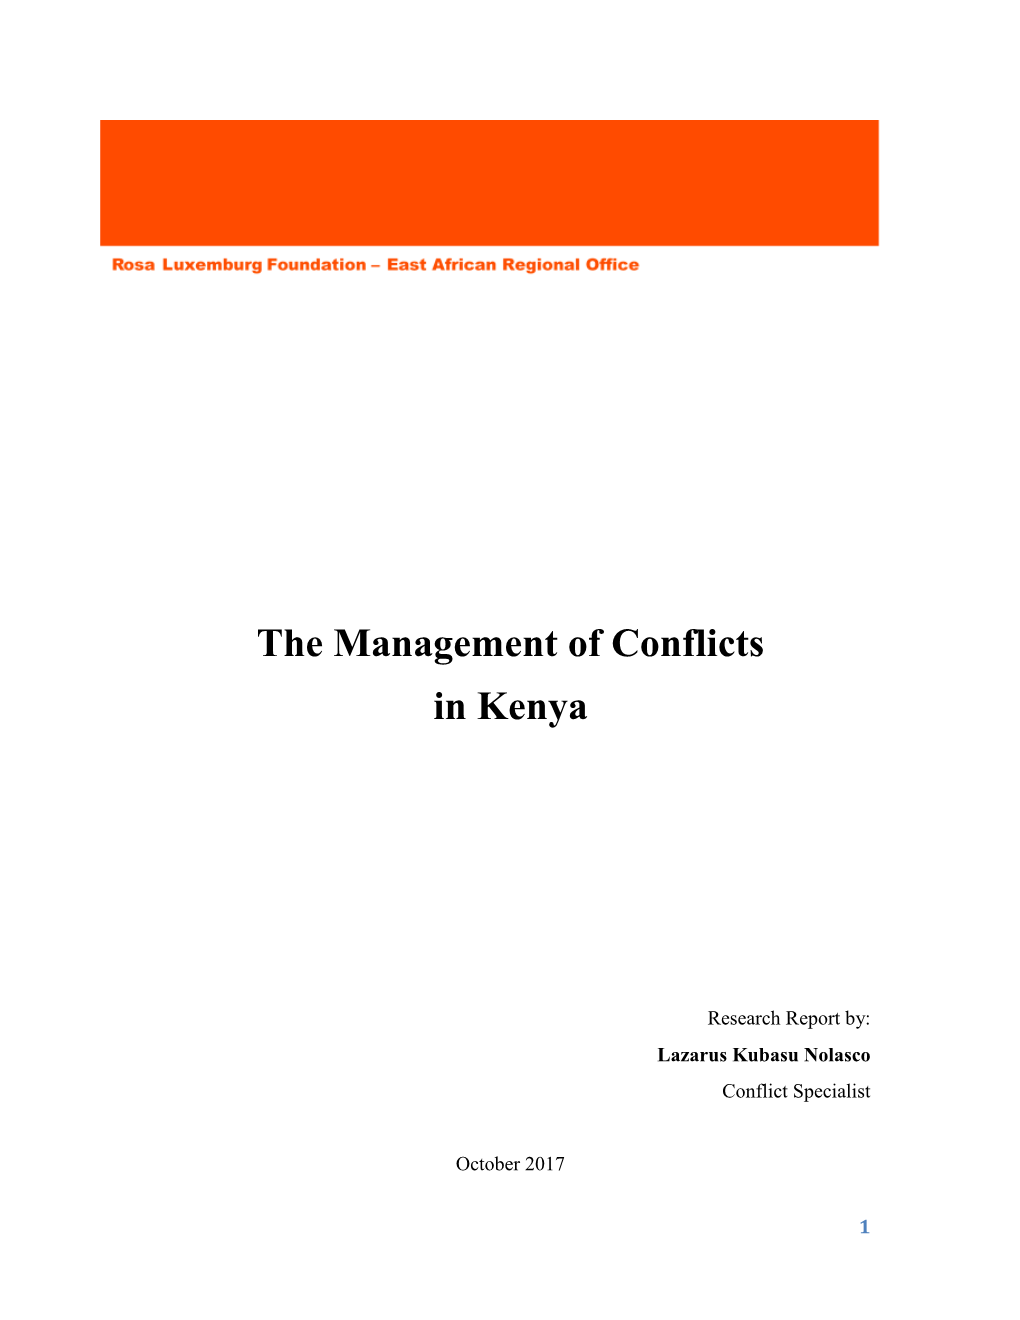 The Management of Conflicts in Kenya